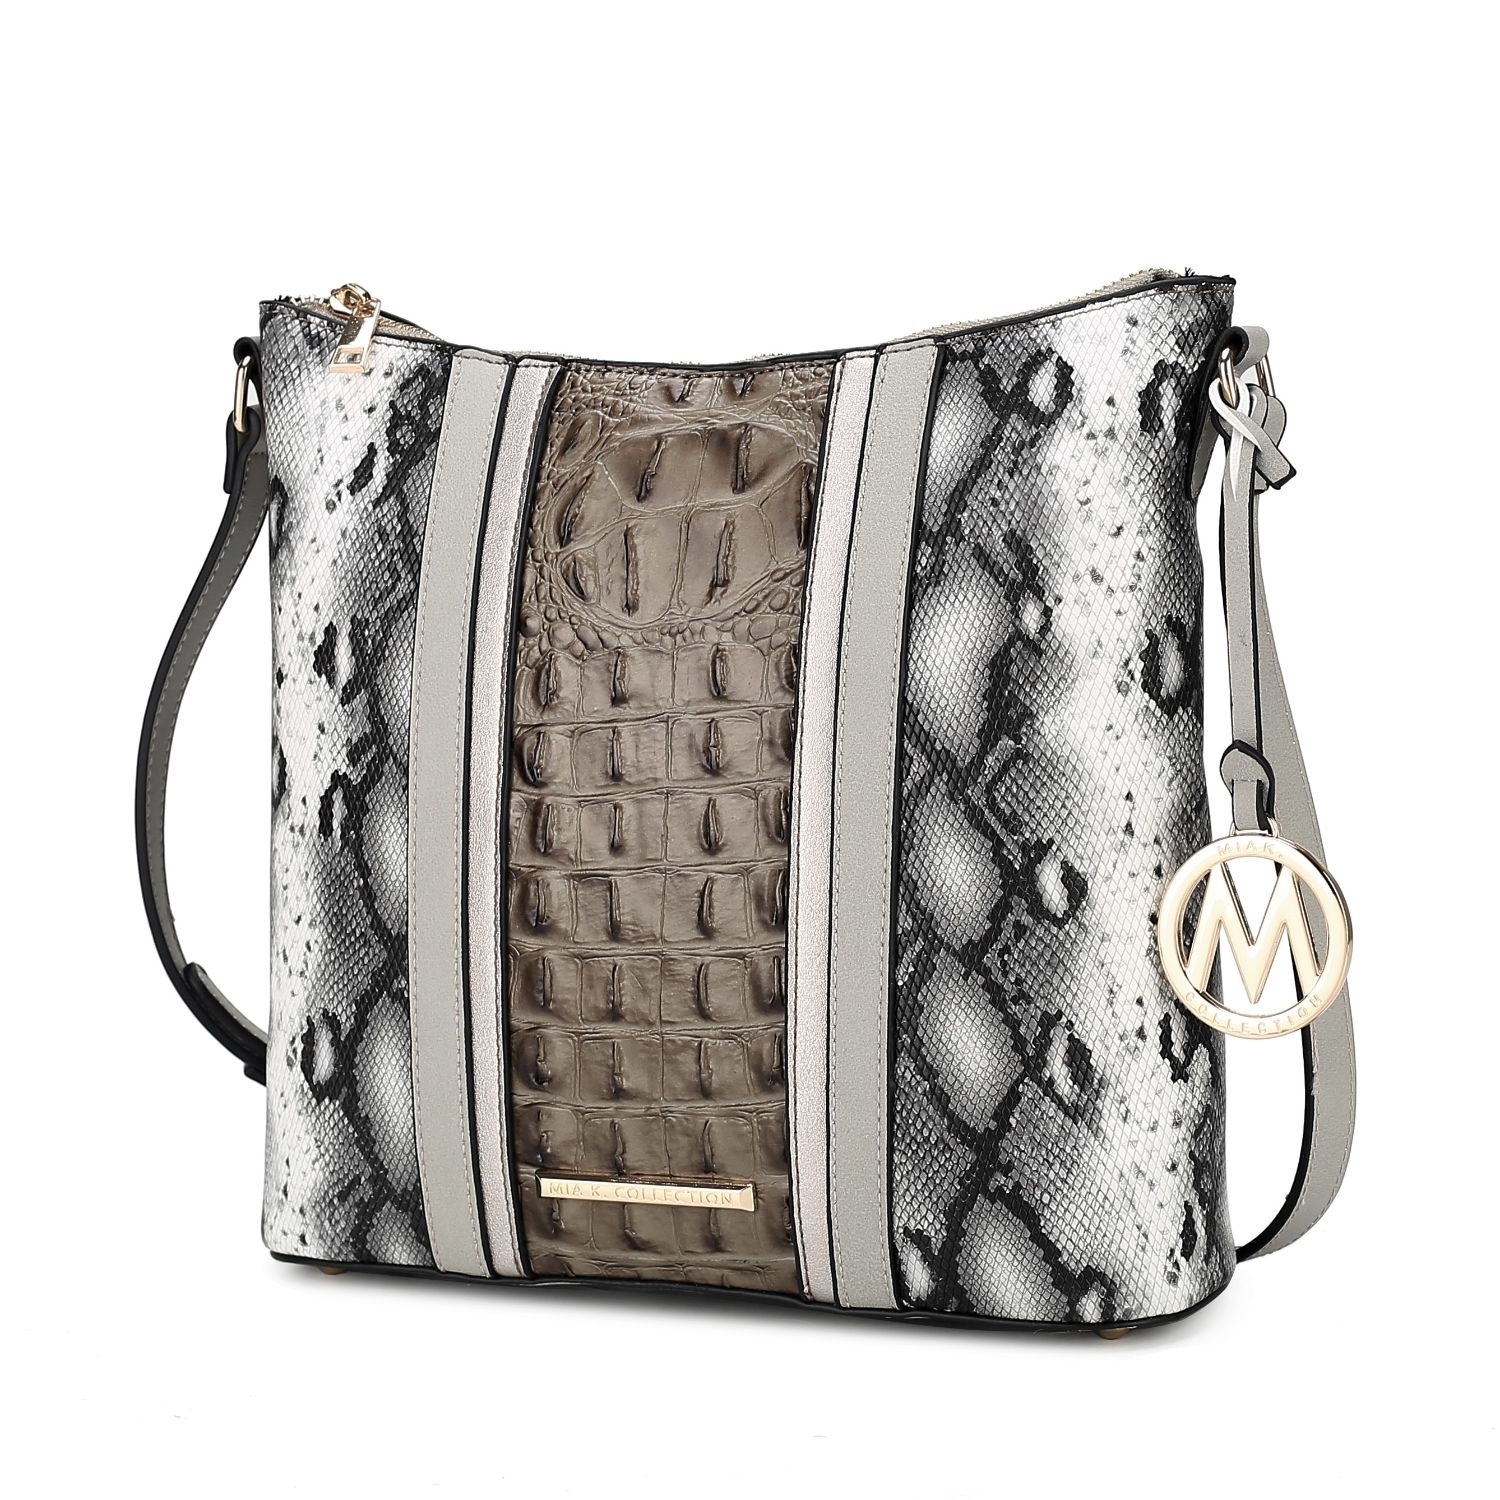 MKF Collection Meline Faux Crocodile And Snake Embossed Vegan Leather Women's Shoulder Bag By Mia K - Taupe